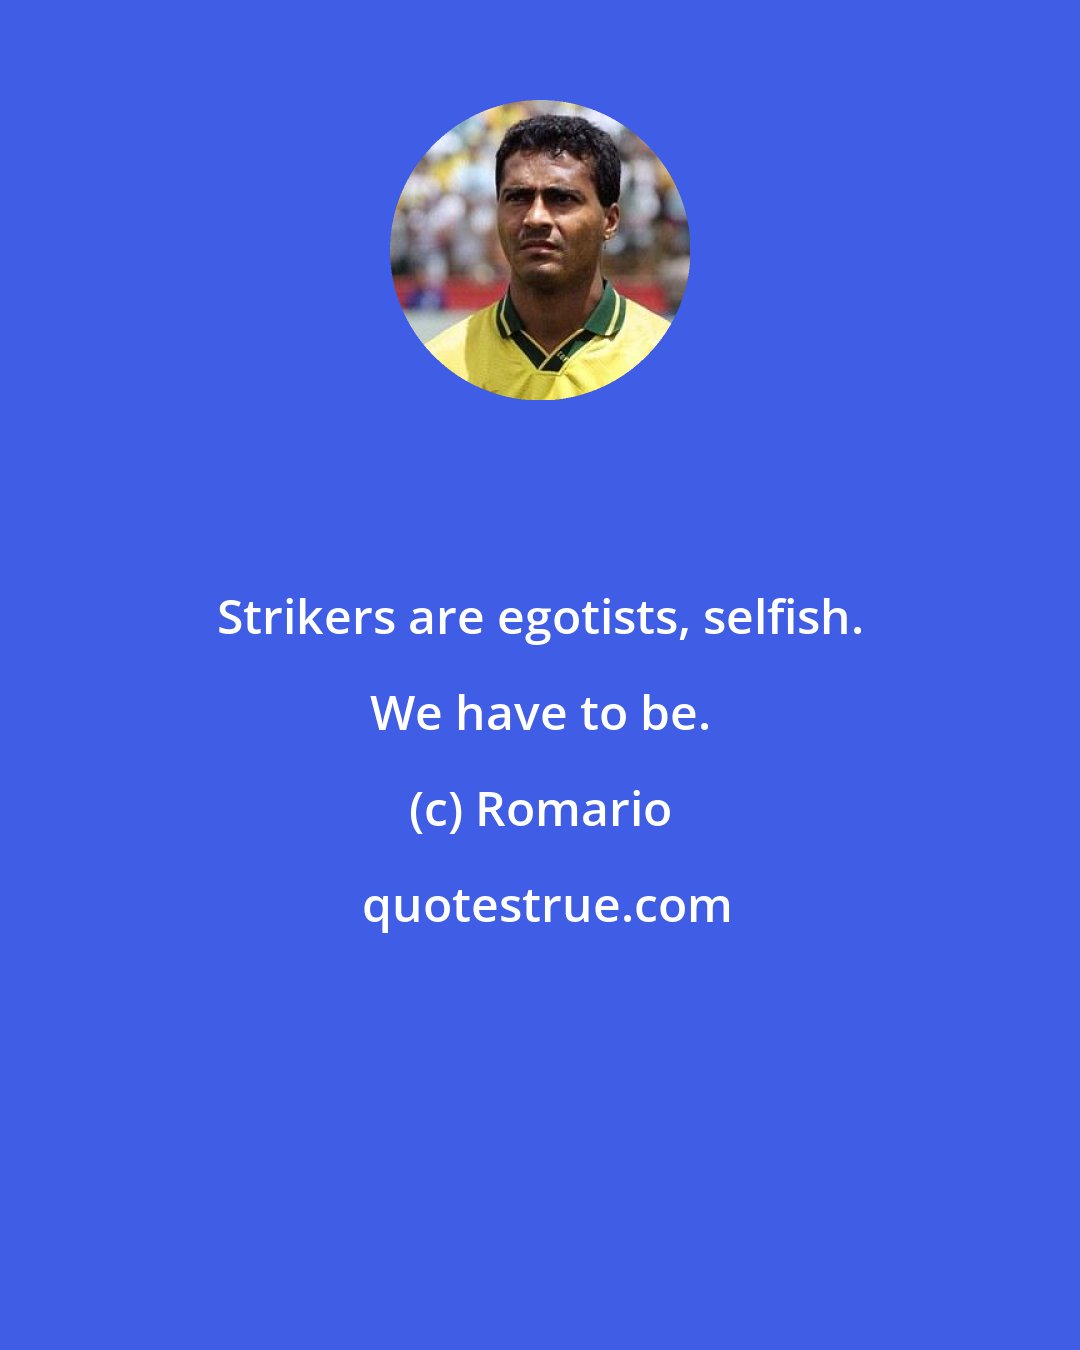 Romario: Strikers are egotists, selfish. We have to be.